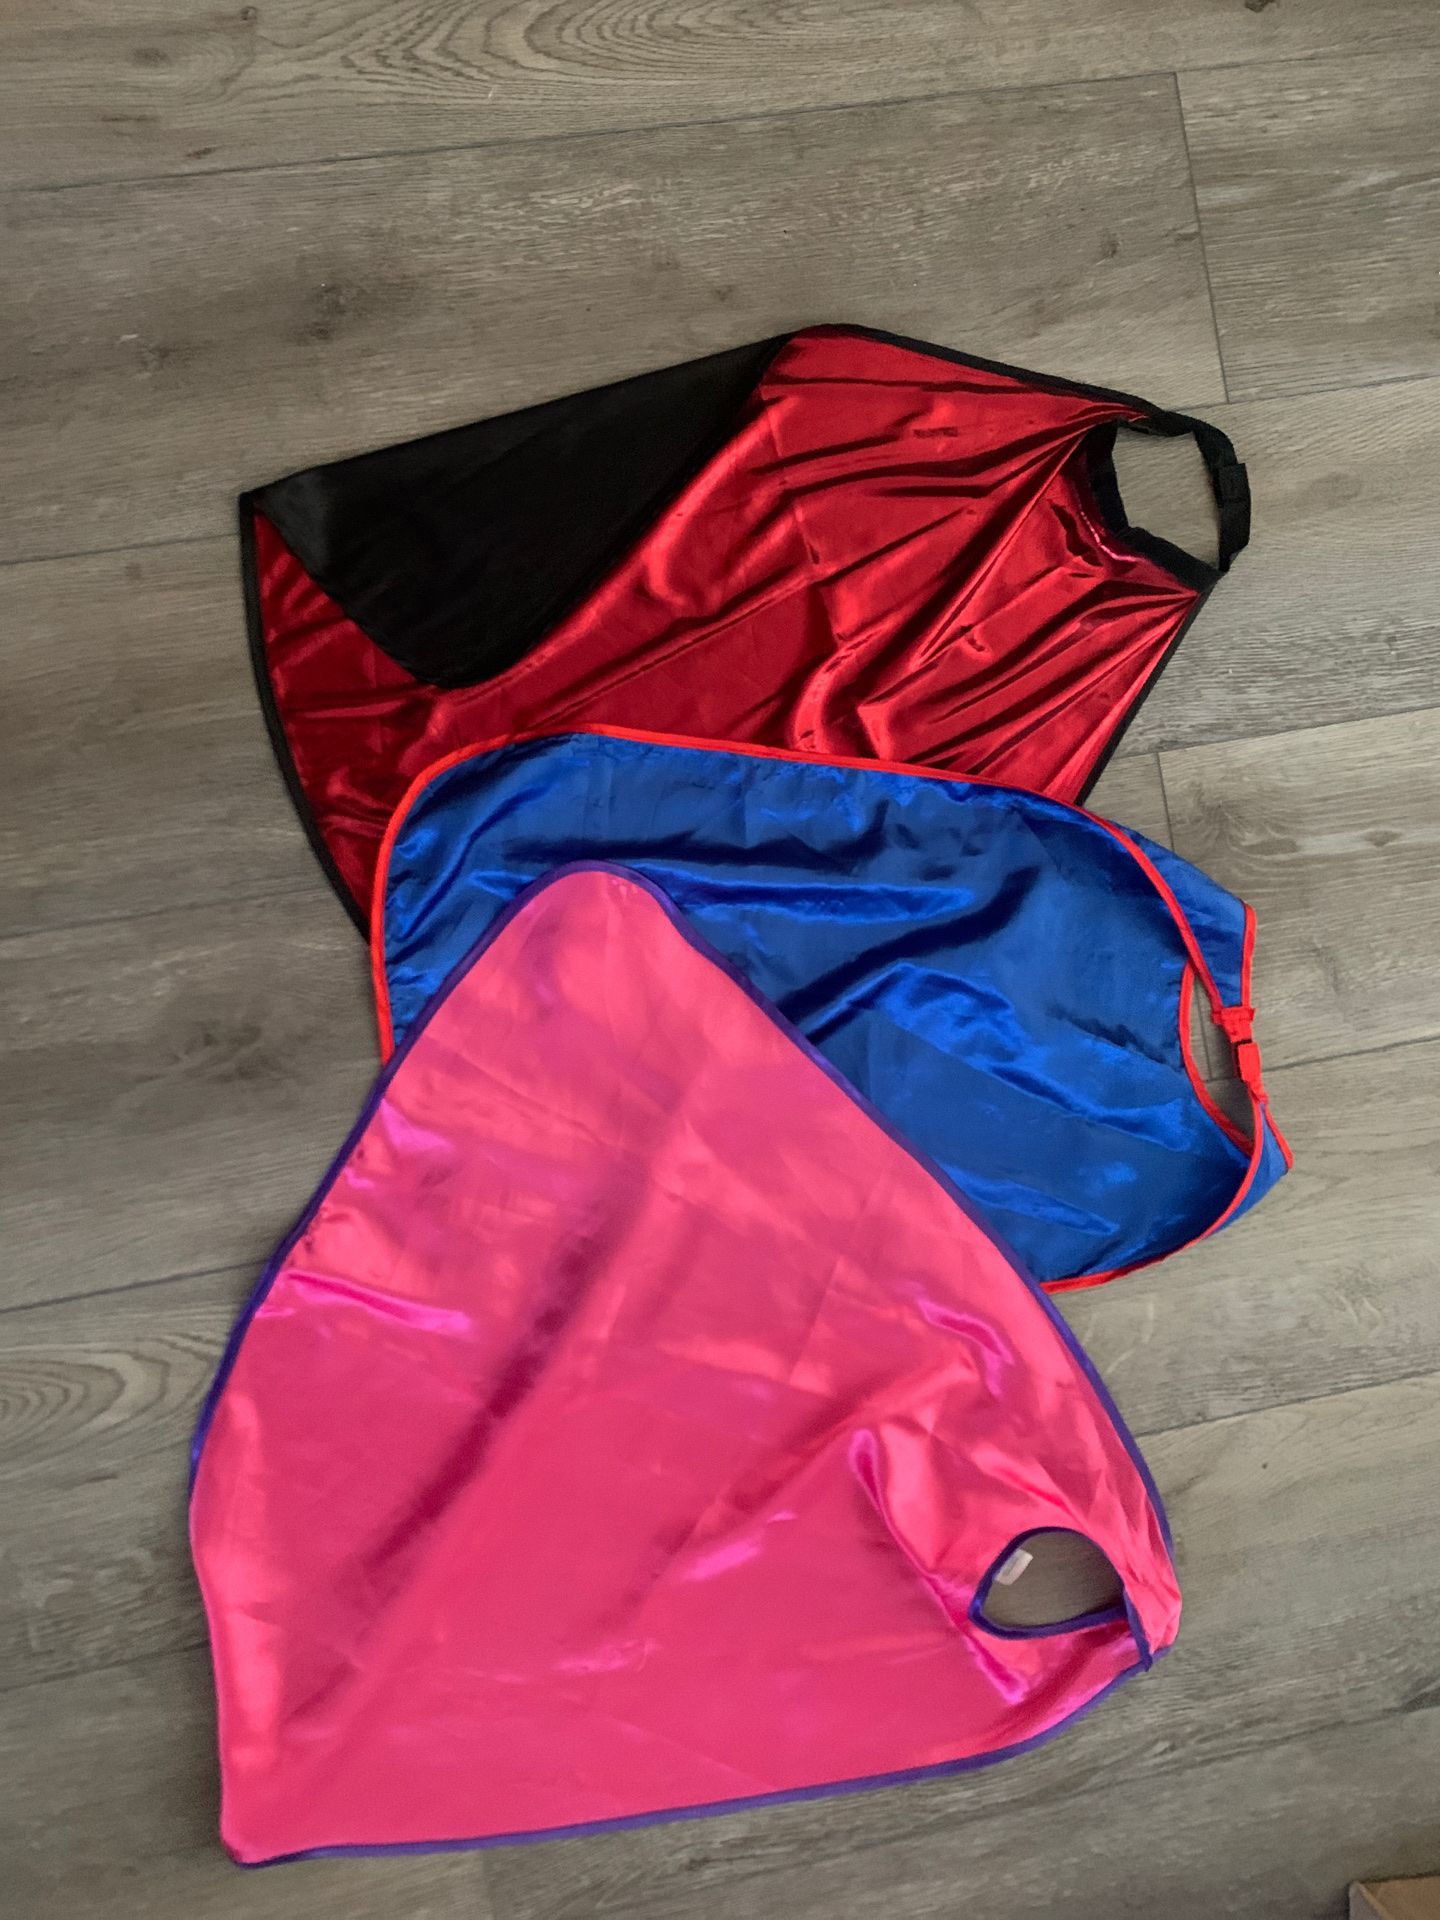 3 Kids Capes for dress up/costume